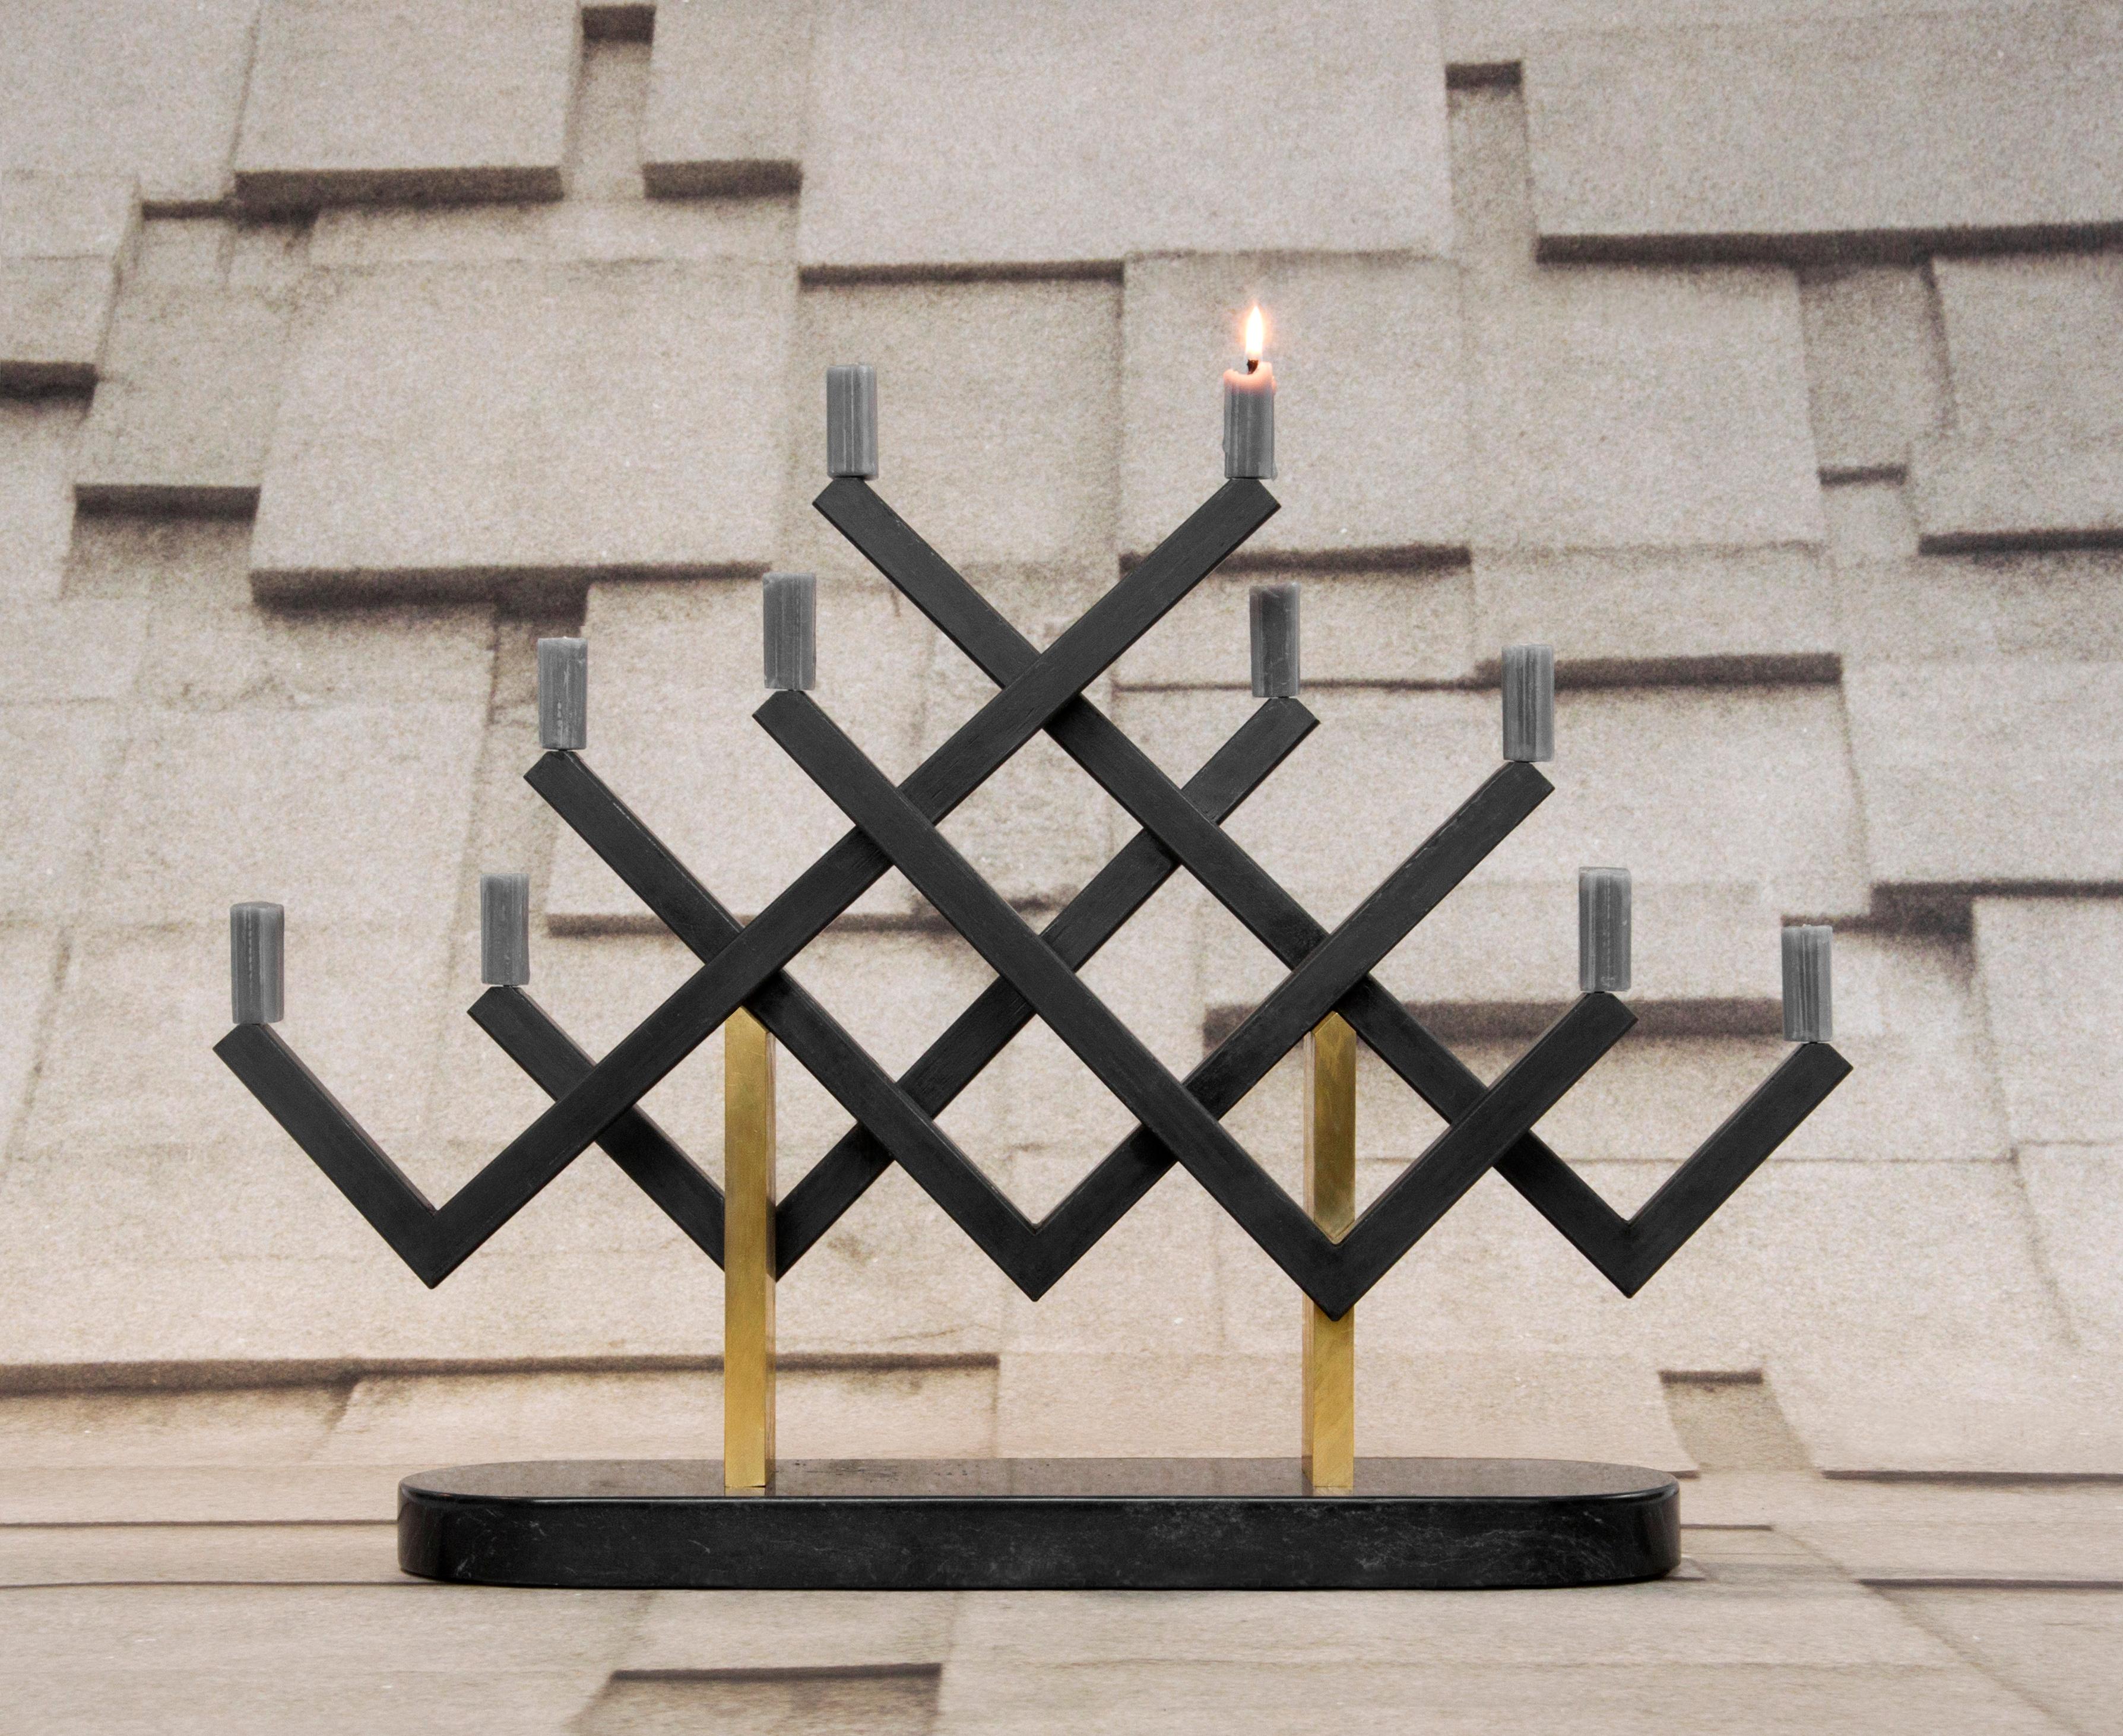 Cancello candelabra by Oeuffice
Edition: 12 + 2AP
2013
Dimensions: 60 x 13 x 44 cm
Materials: Black oxide steel, solid brass, black marble of ormea

The structure of this candelabra represents an extract of the many elegant and elaborate